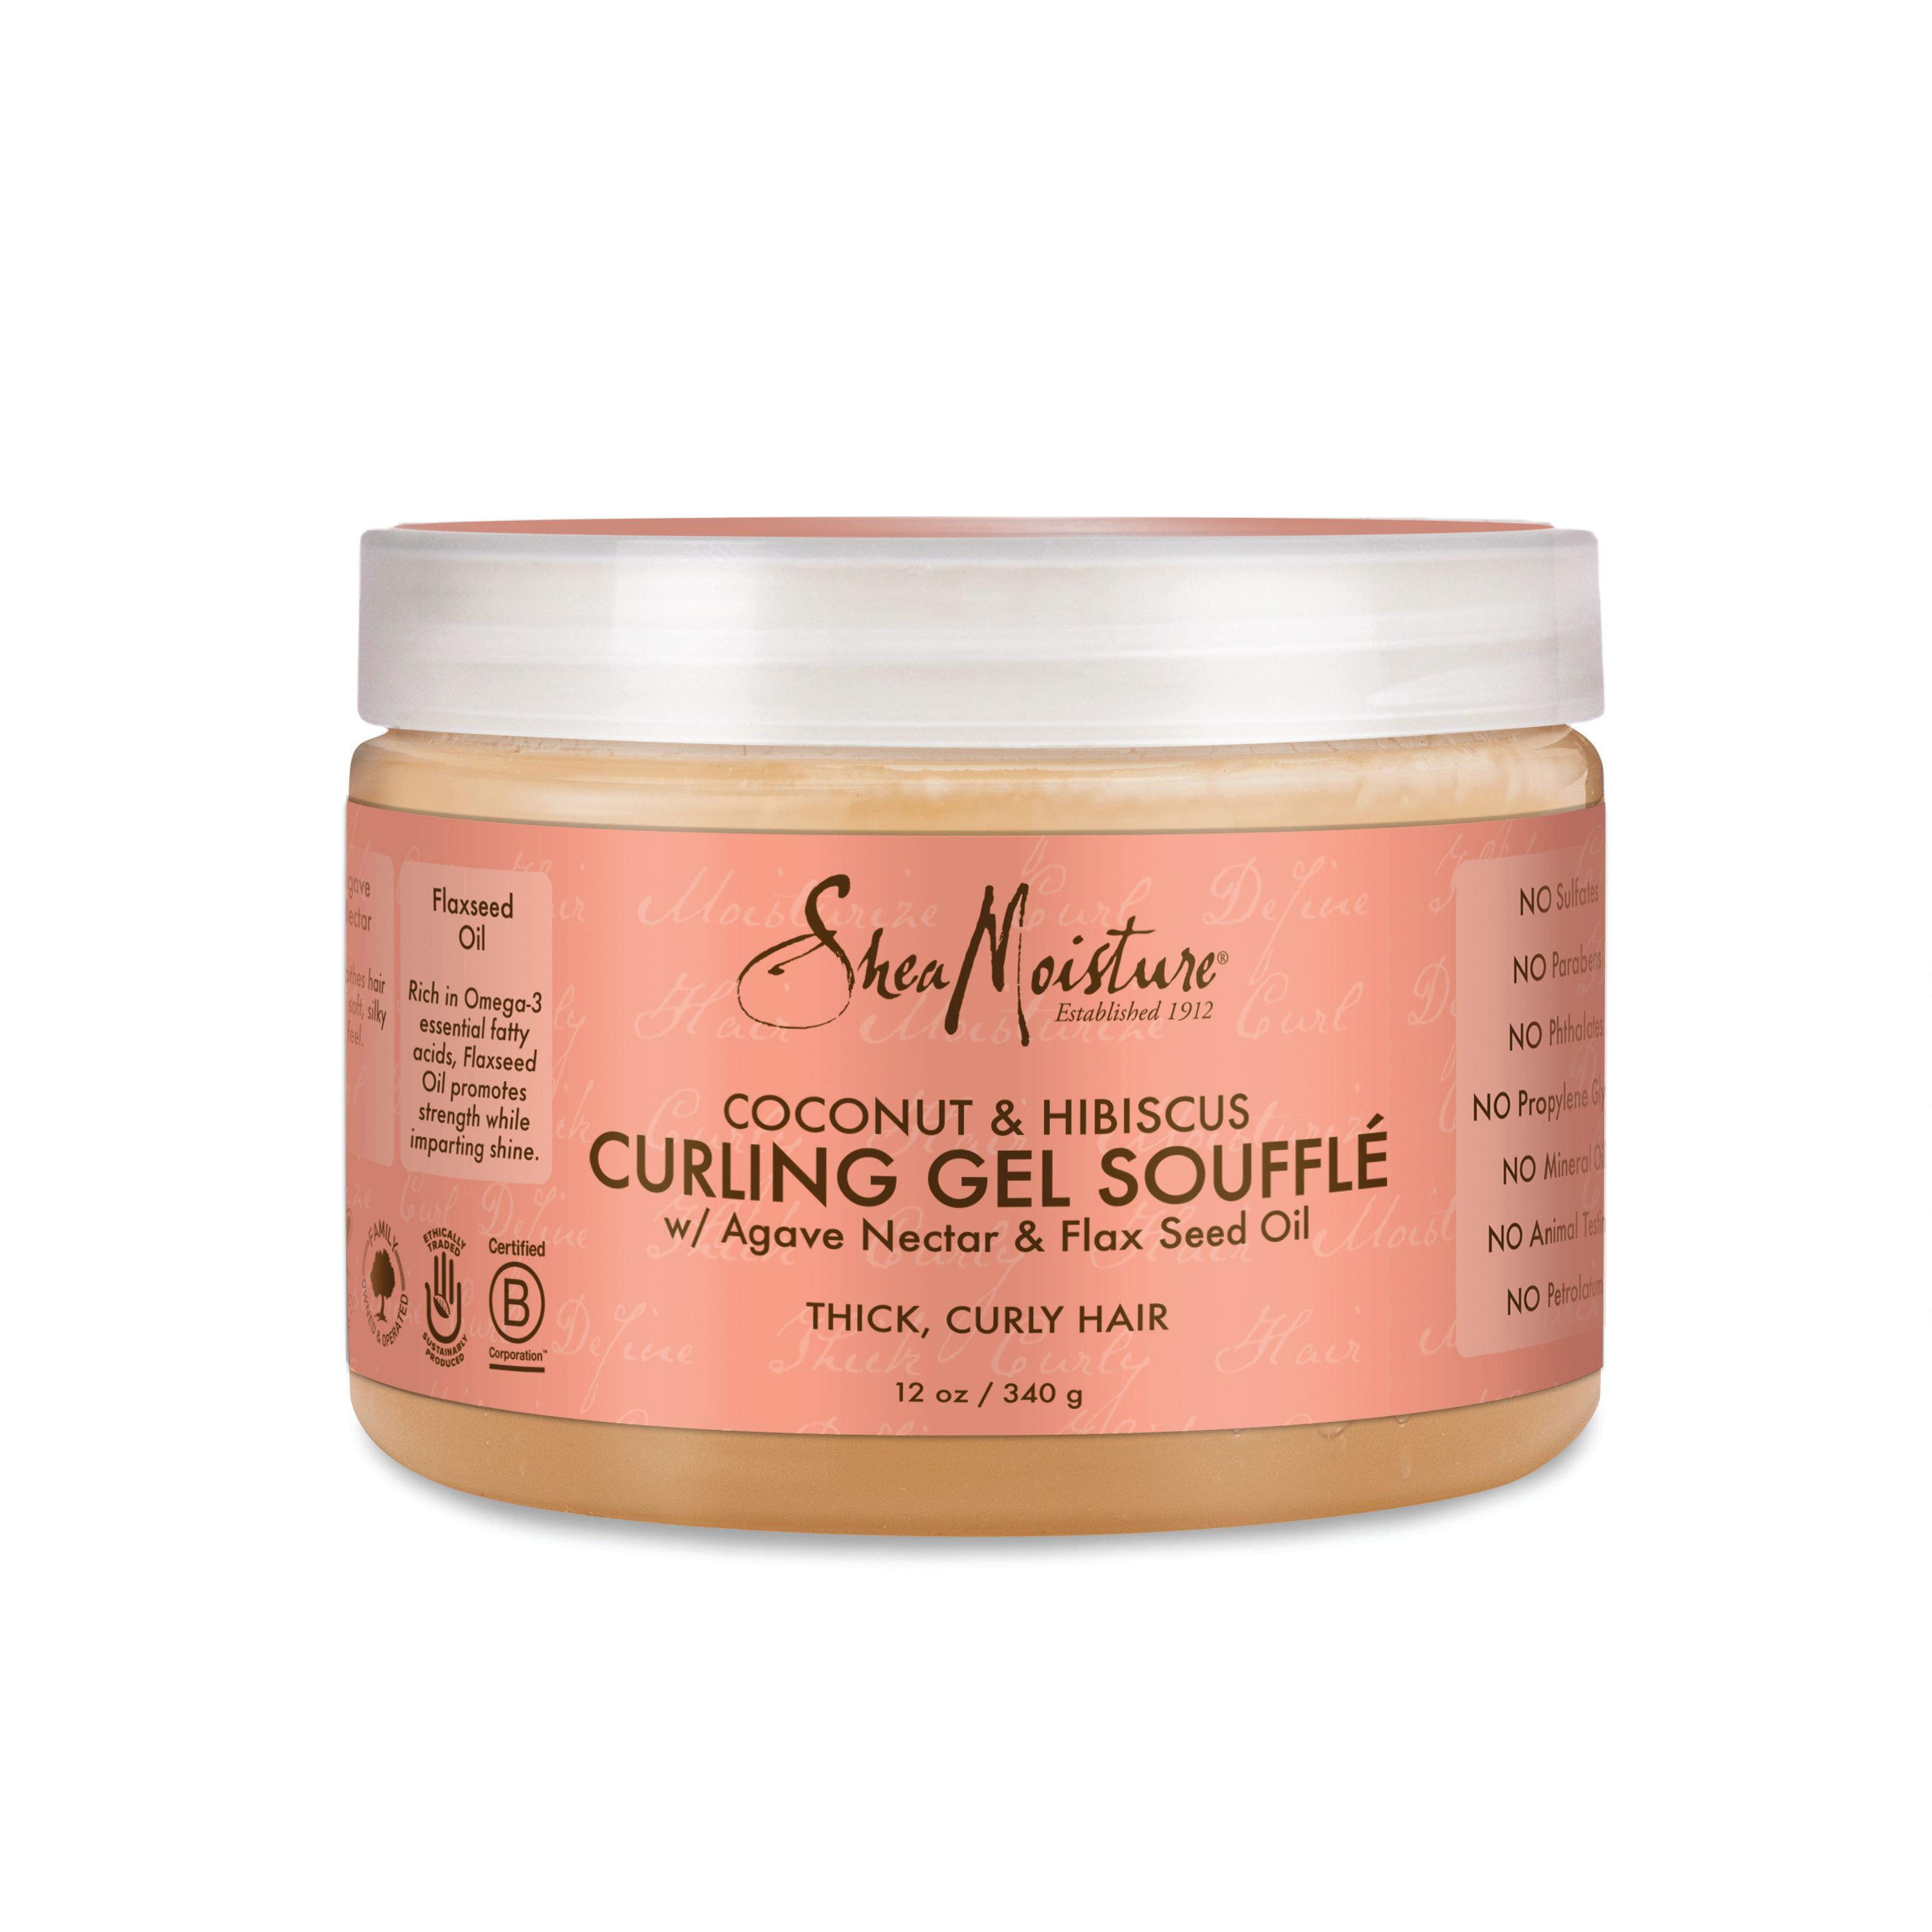 SheaMoisture Frizz Control Curling Gel Souffle Coconut and Hibiscus Sulfate Free for Curly Hair 12oz